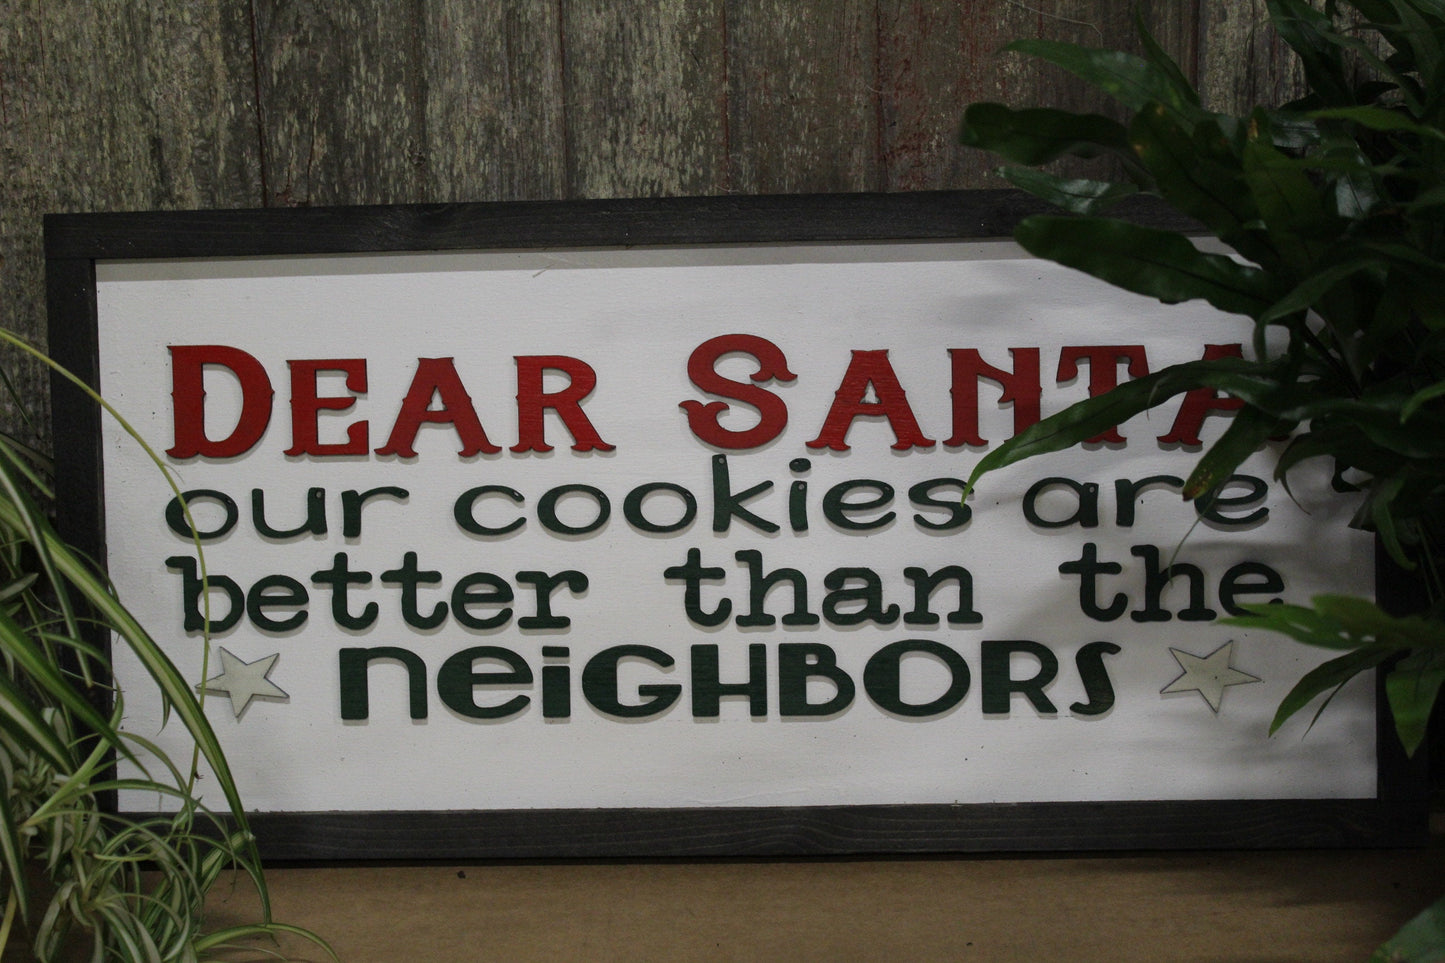 Dear Santa Cookies Funny Sign Our Cookies Are Better Than The Neighbors Raised Text Wood Sign Country Color Wall Decoration Christmas Red